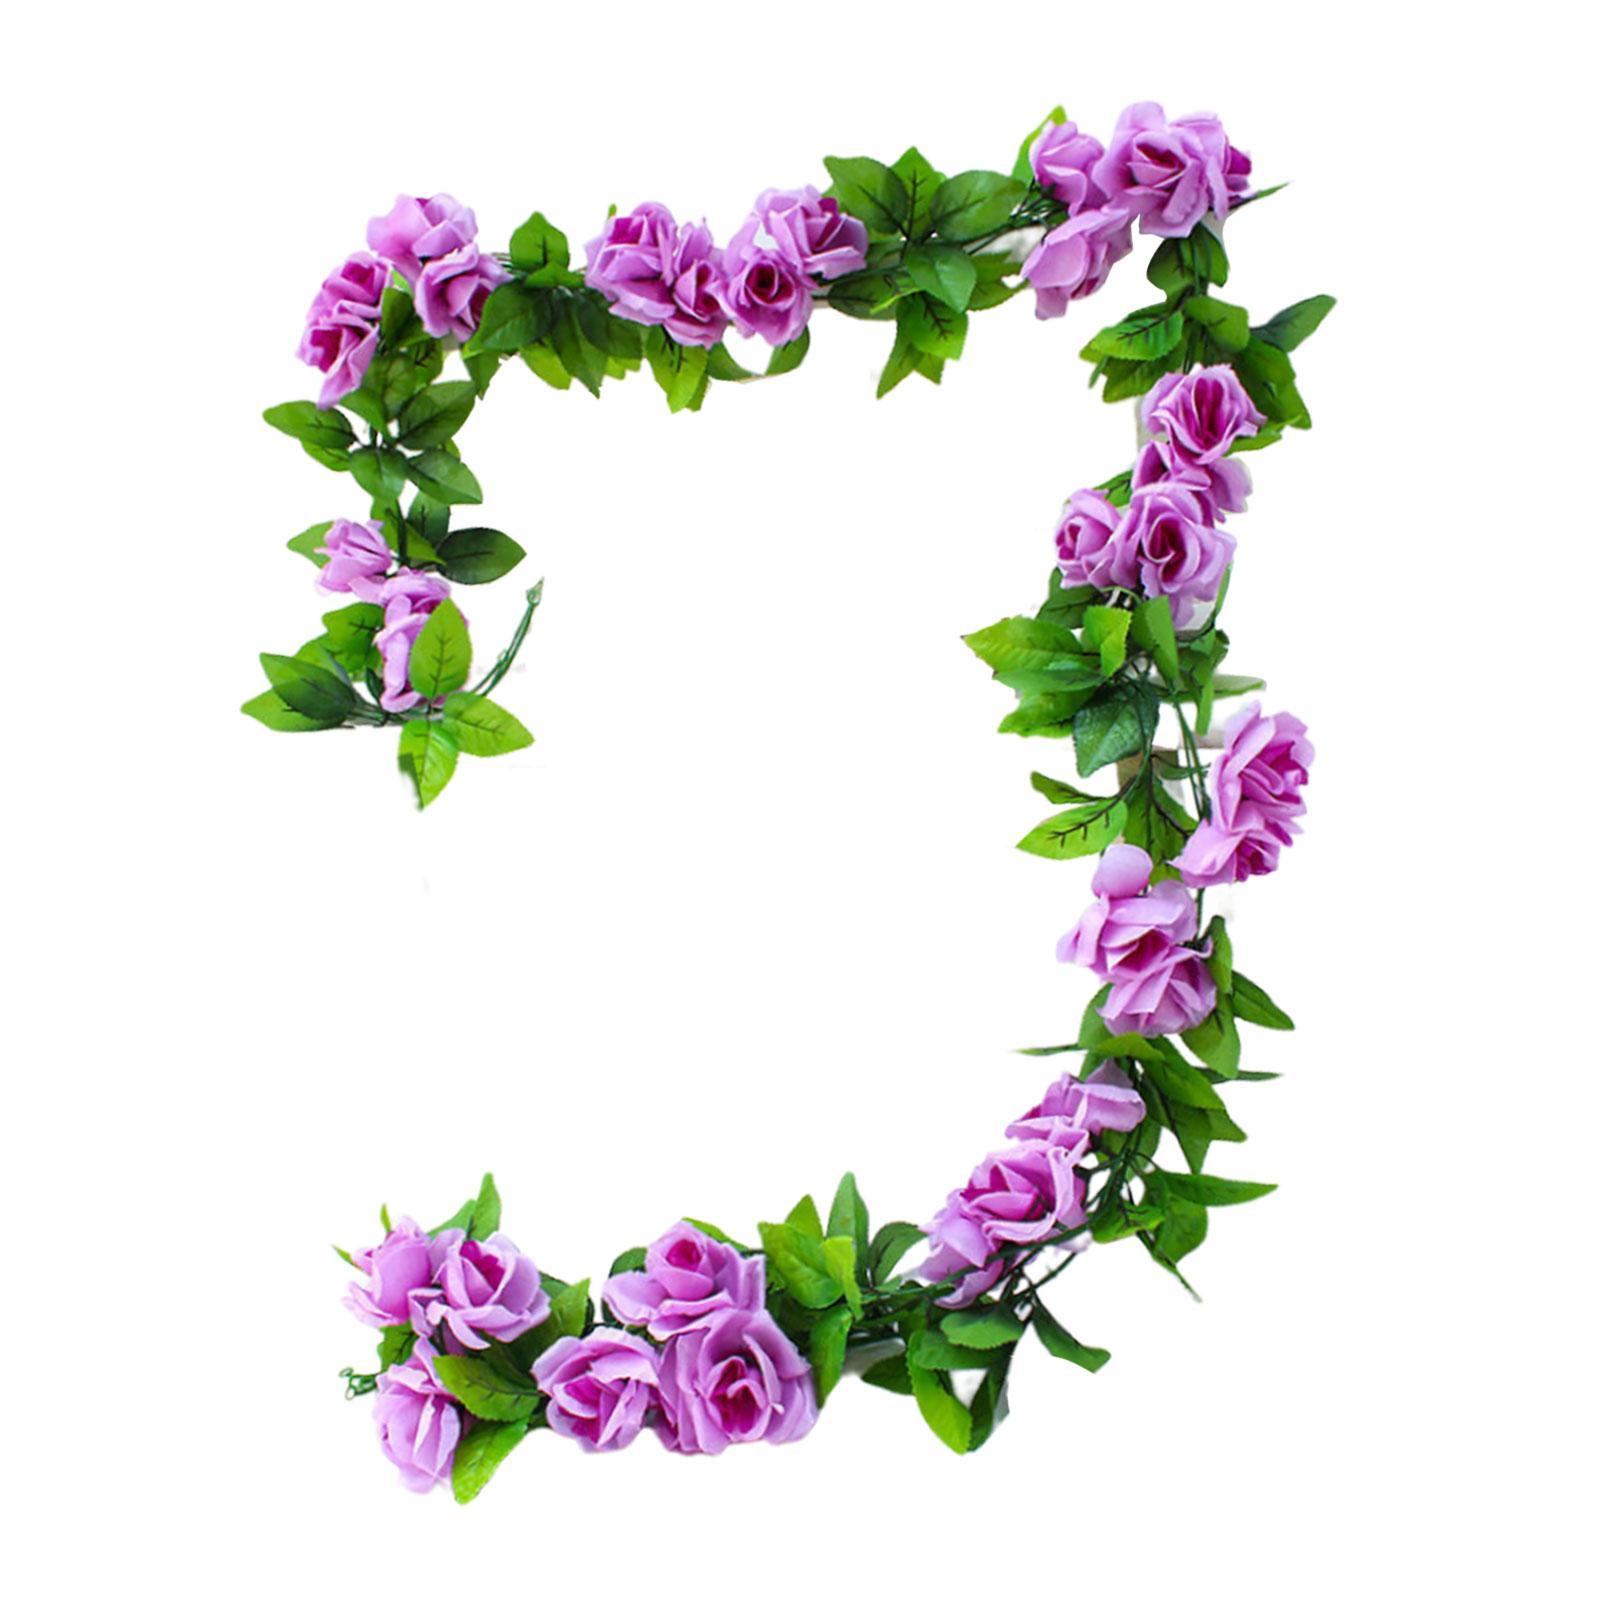 Artificial Flowers Vines Spring Flower Wreath Holiday Wreath for Decor Amaranth